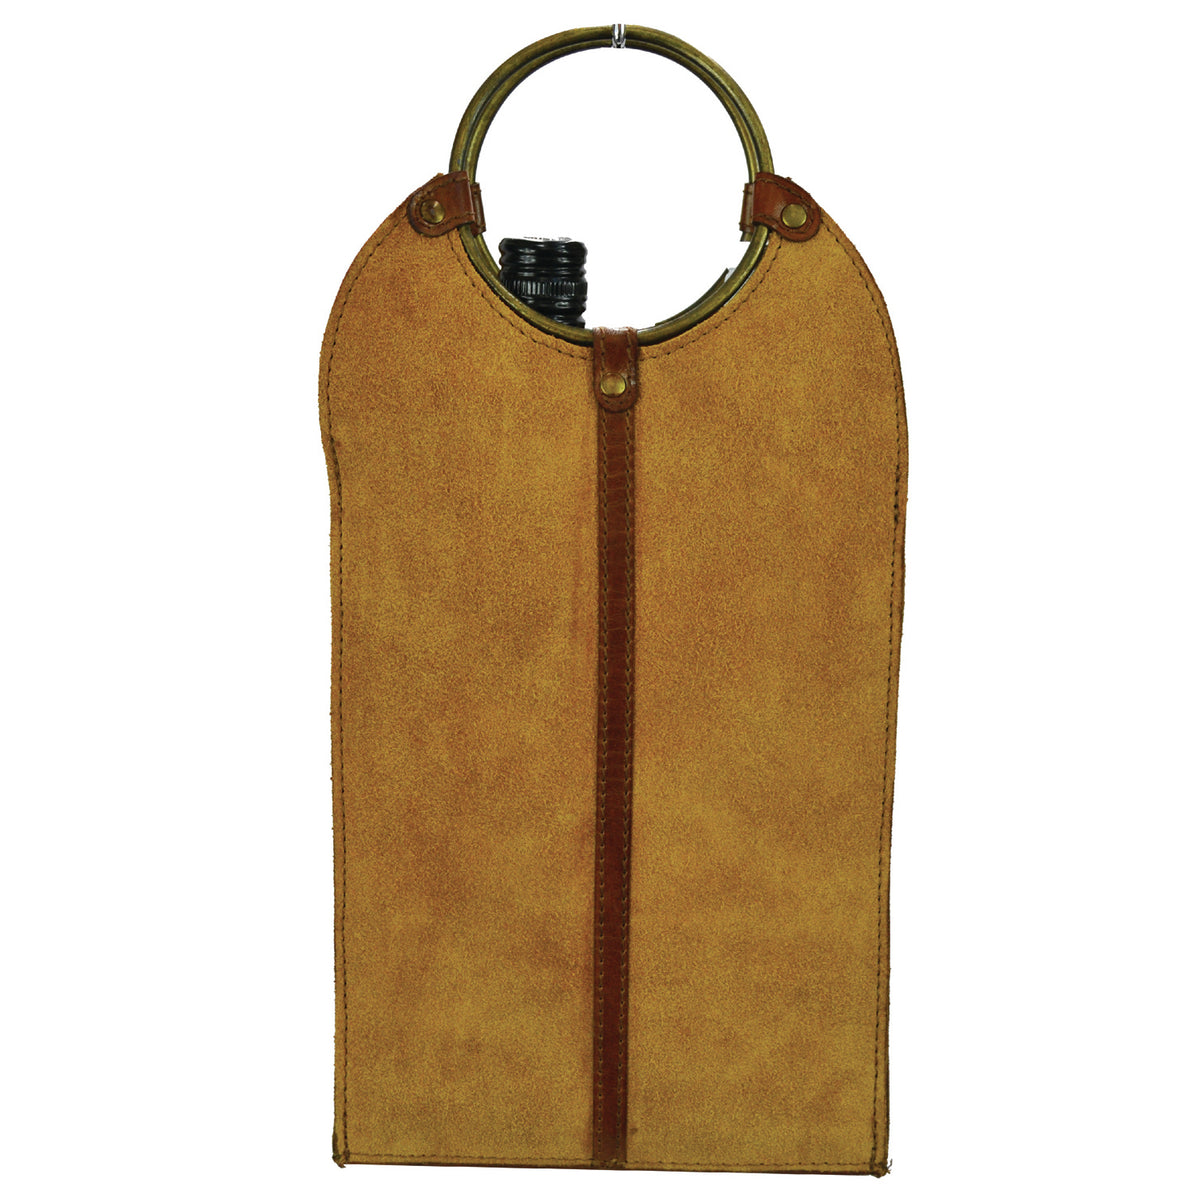 Dynastra Tan Suede Leather Double Wine Holder with Ring Handles - Notbrand